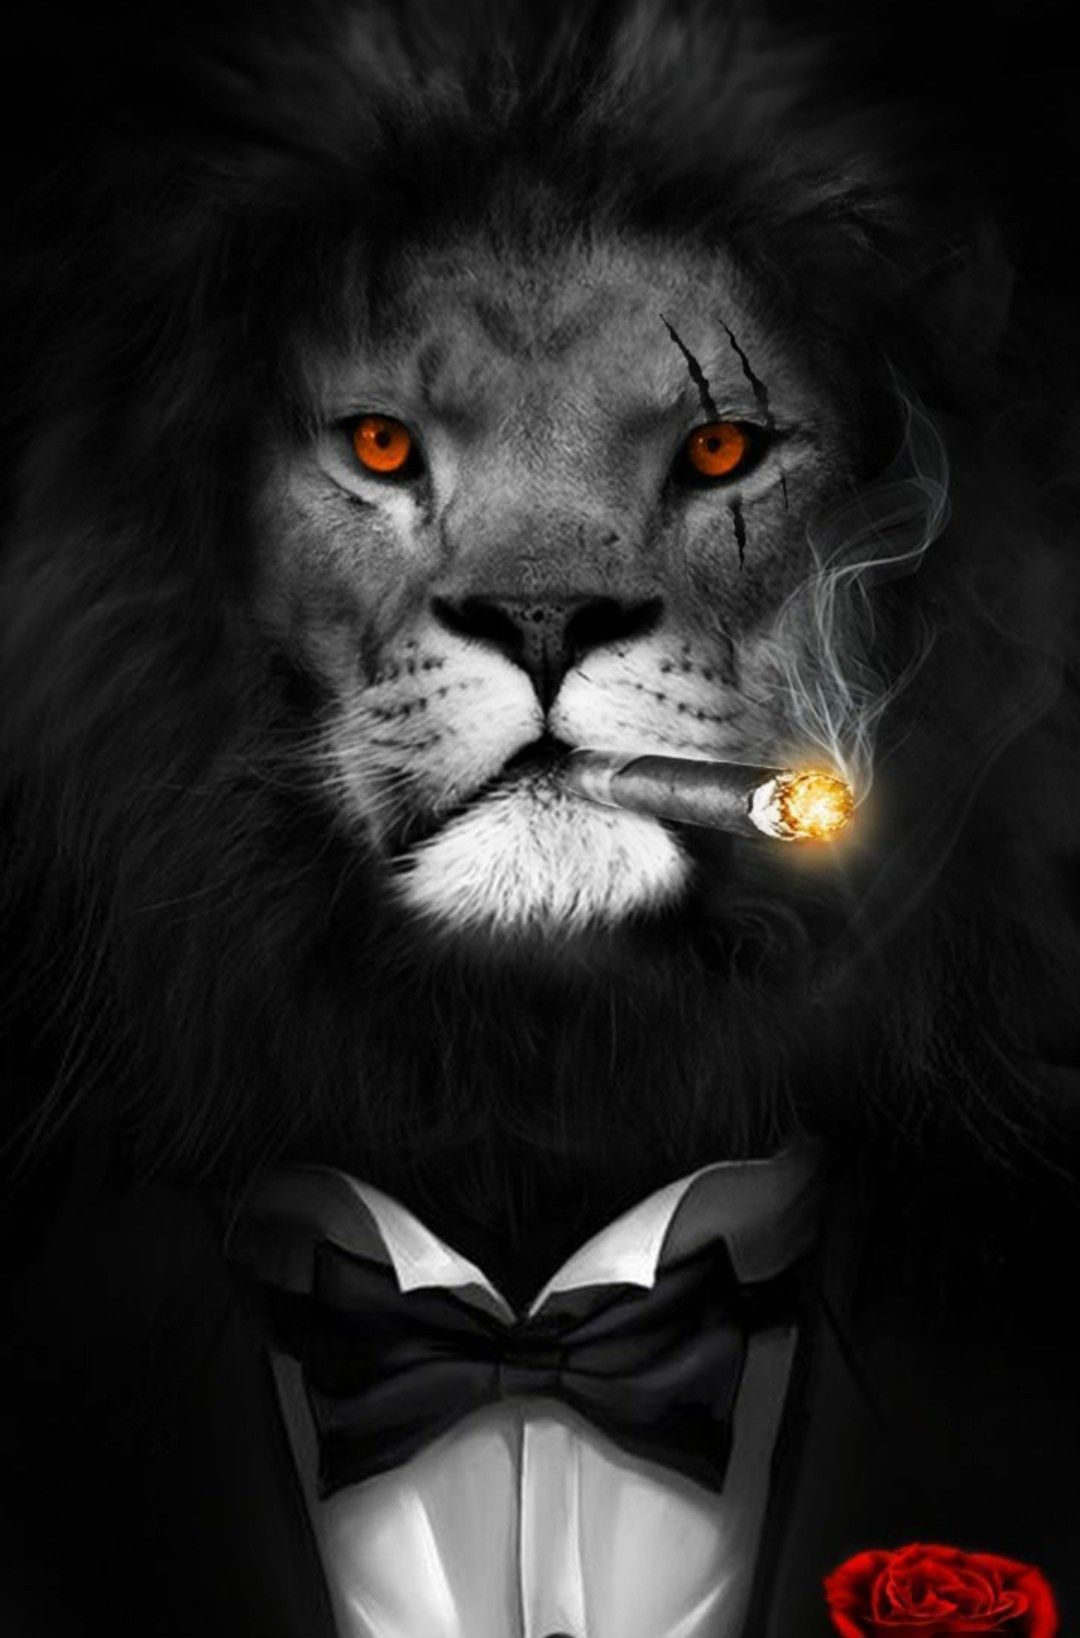 A lion wearing tuxedo and smoking cigarette - Lion